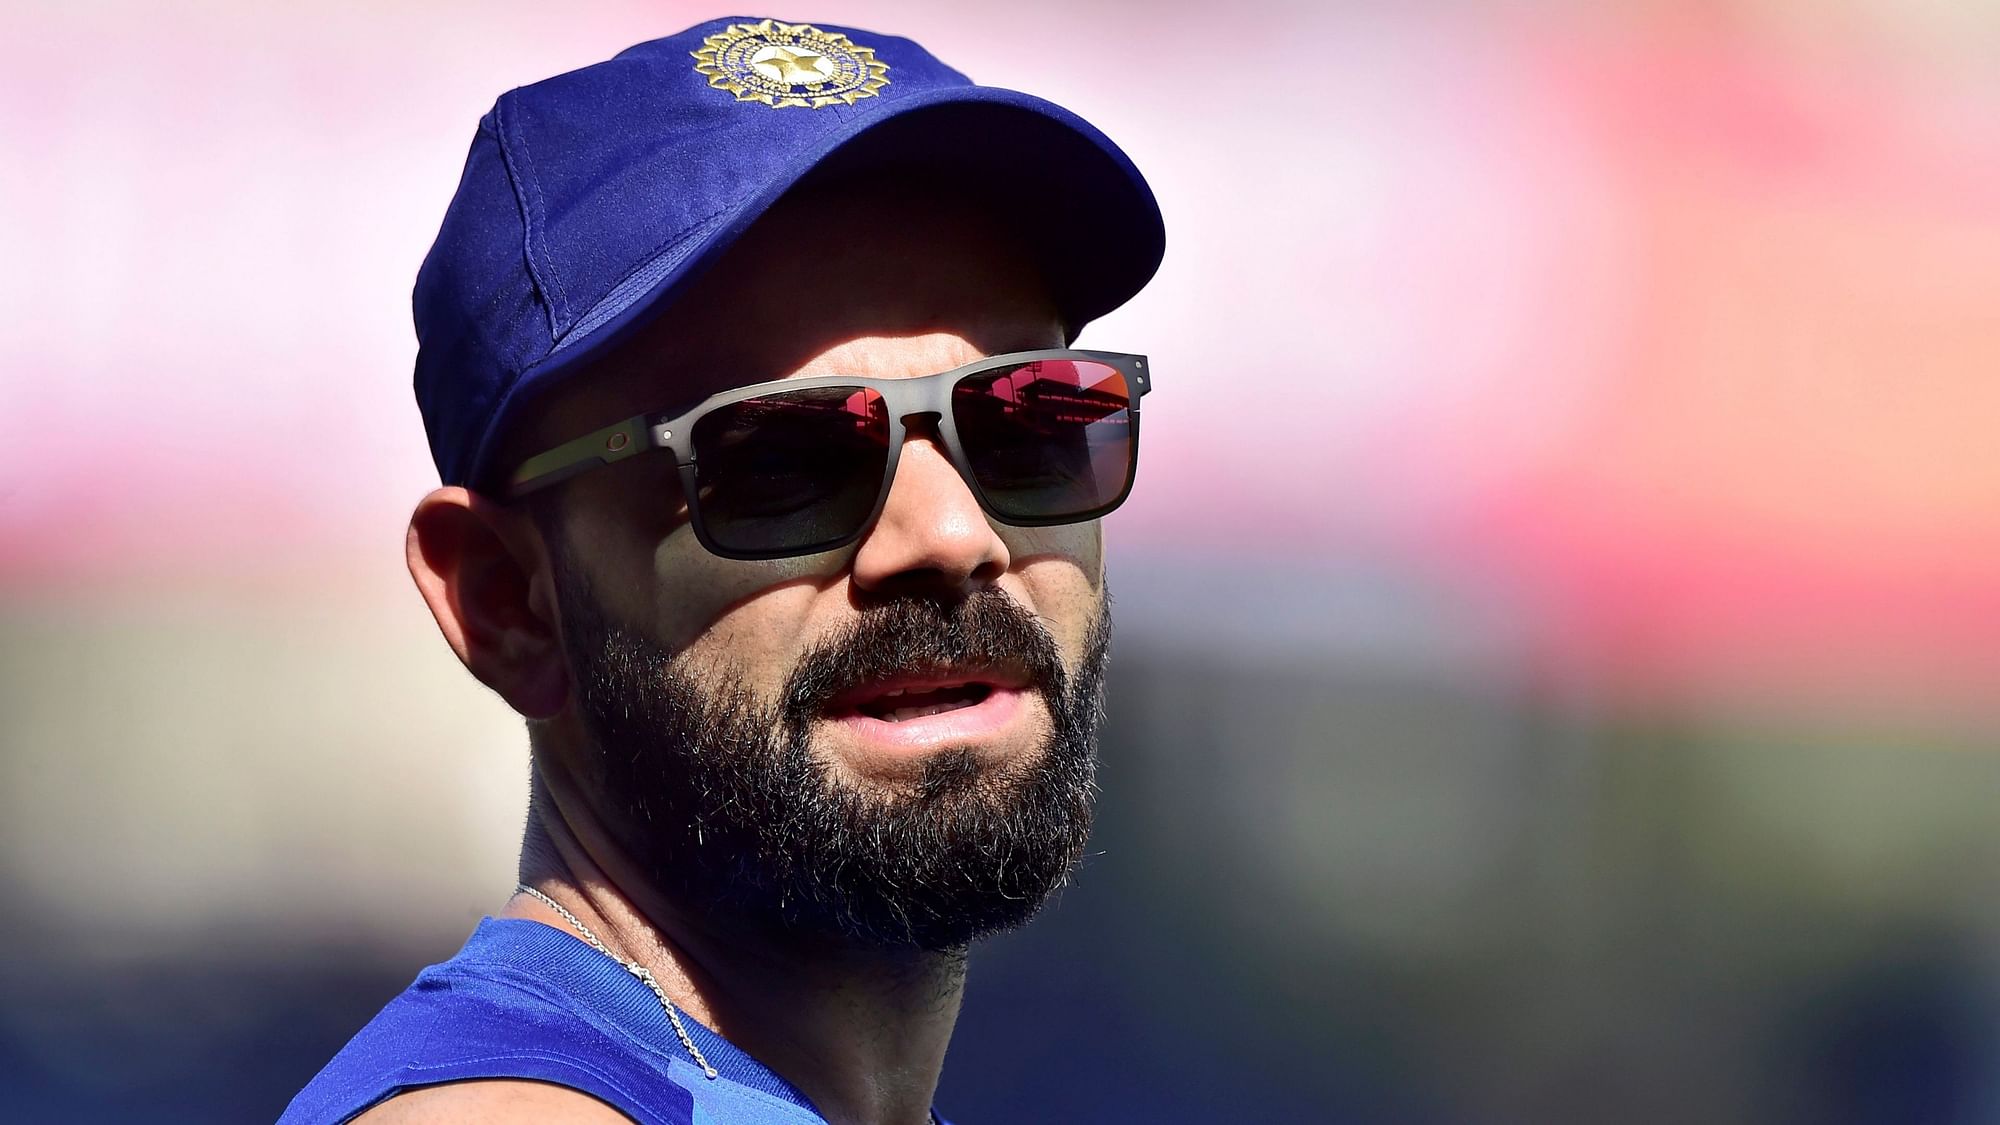 India captain Virat Kohli had a clear message for all his World Cup bound teammates – don’t pick up bad (technical) habits during IPL and manage workload carefully.